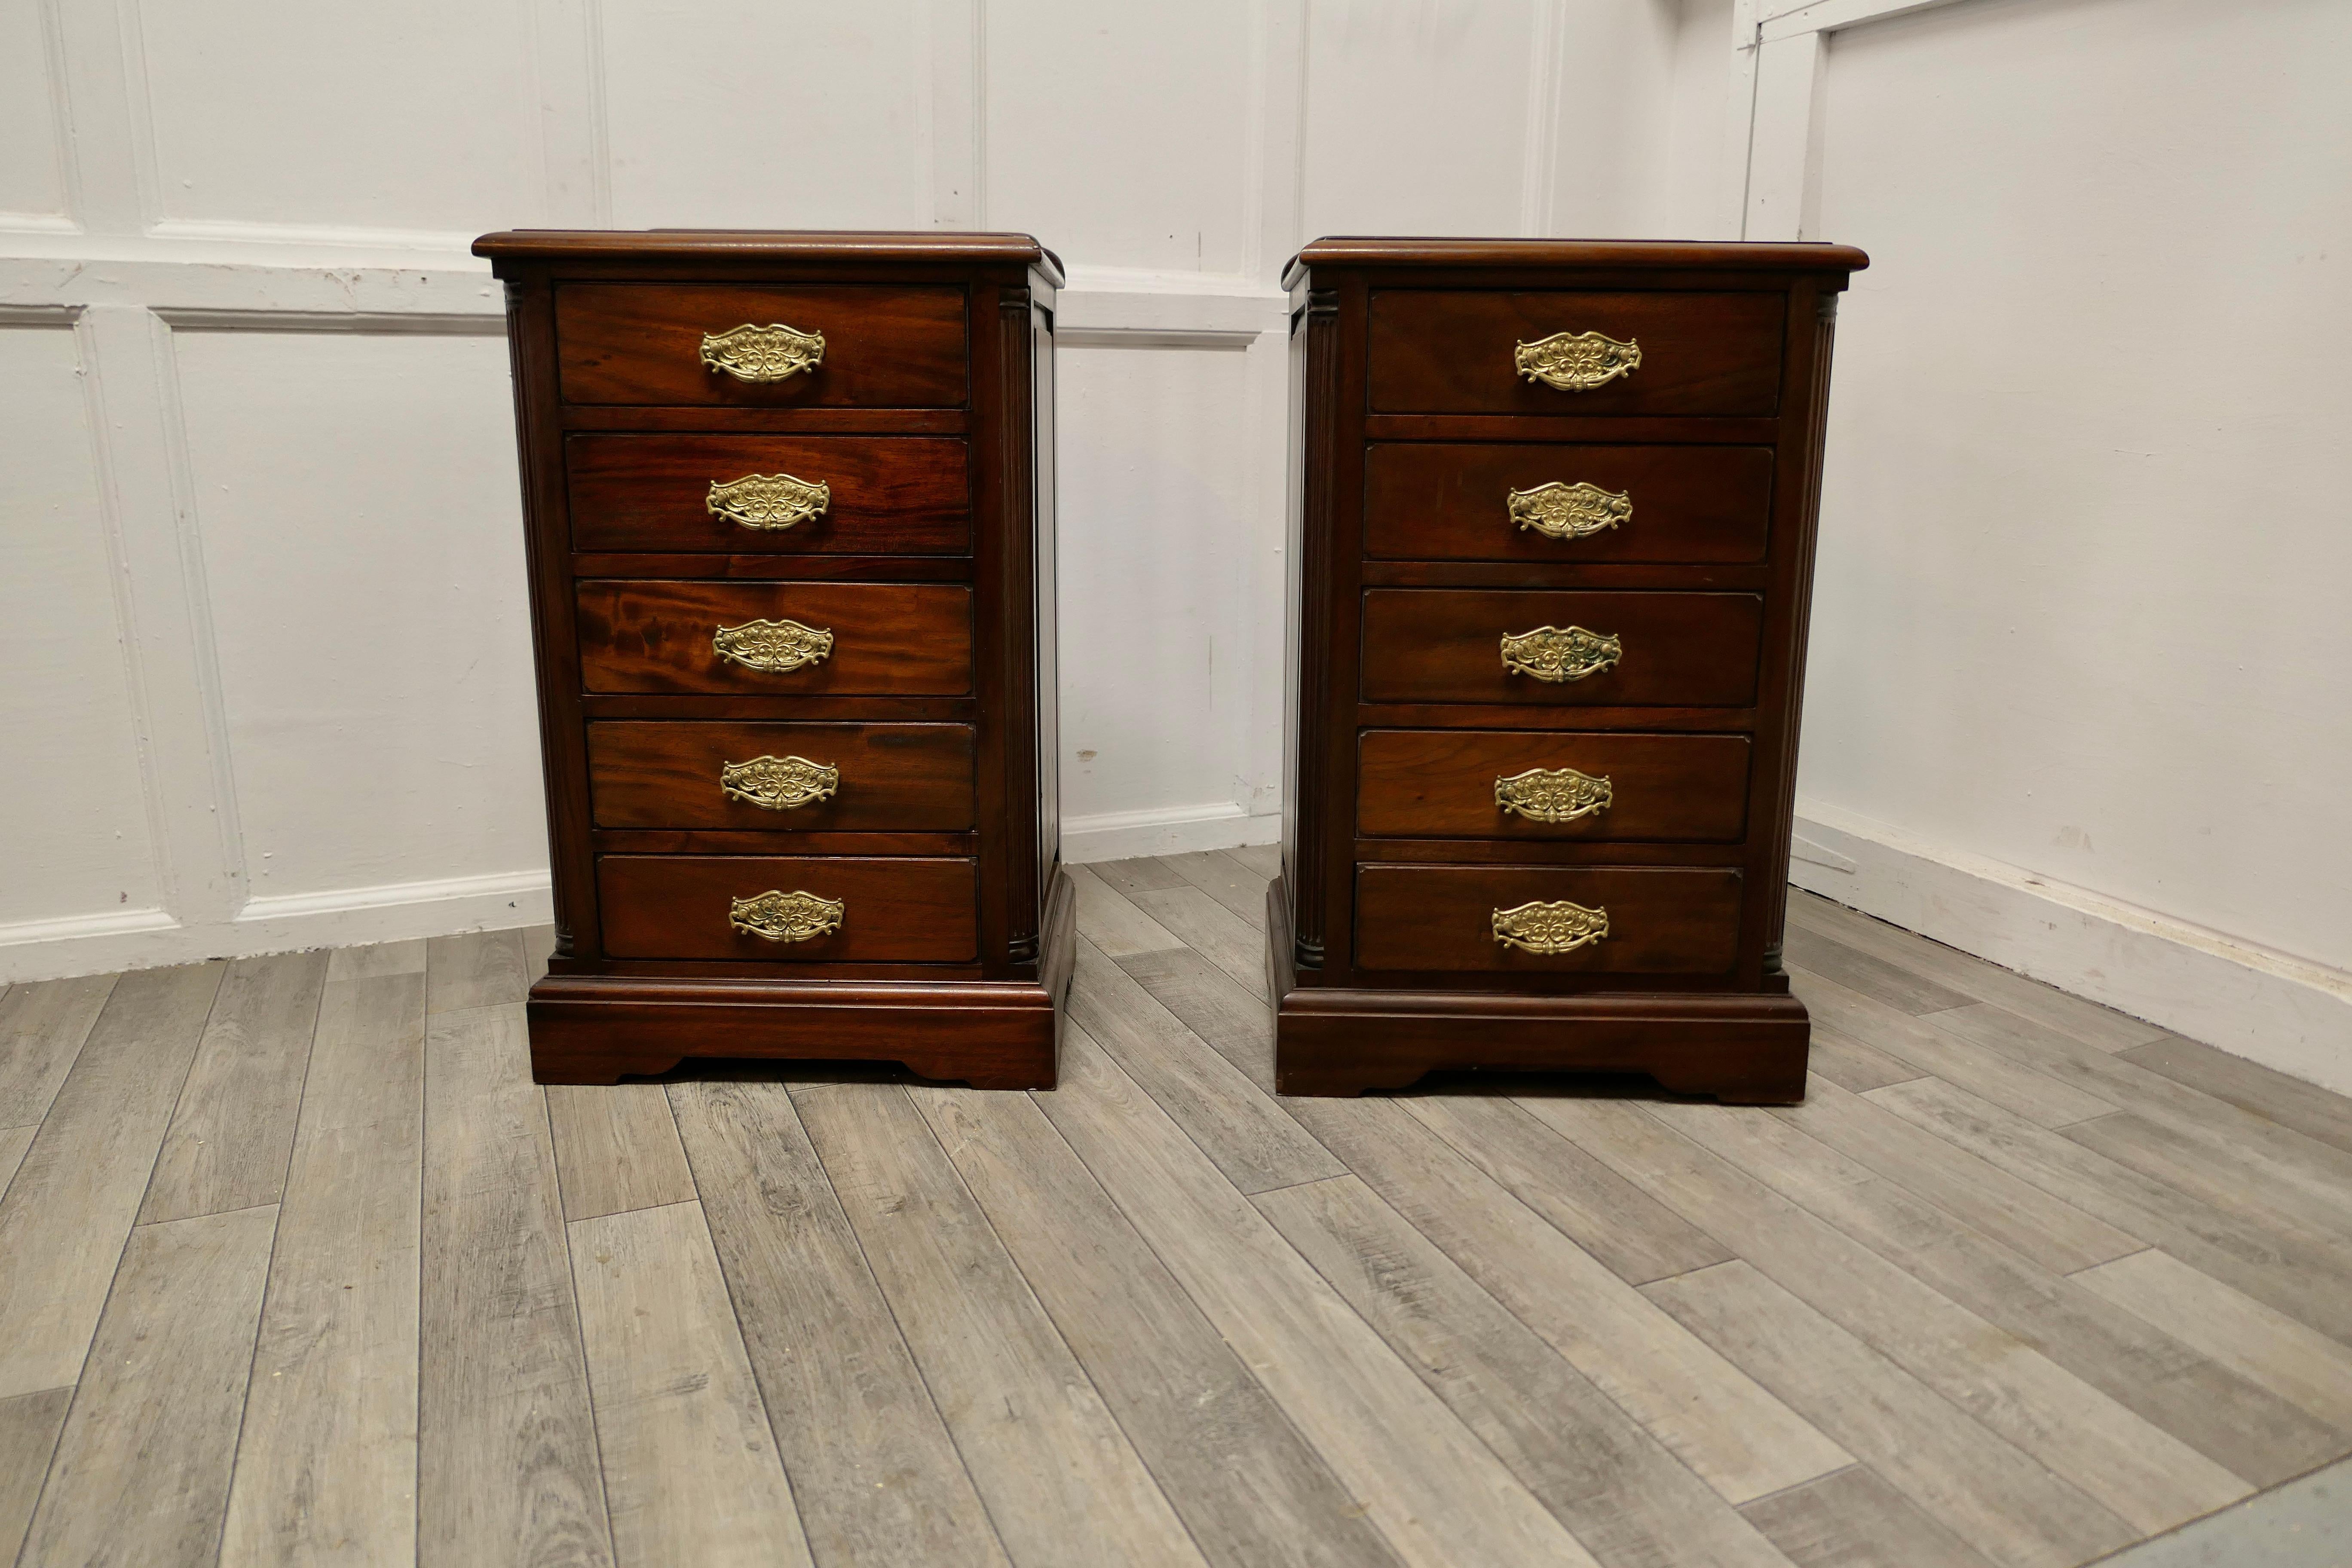 A pair of small 6 drawer chest of drawers, night tables

These are wonderful little chests, they each have 6 drawers and brass handles
The drawers run very smoothly and they each stand on a small plinth with an attractive moulded edge to the top